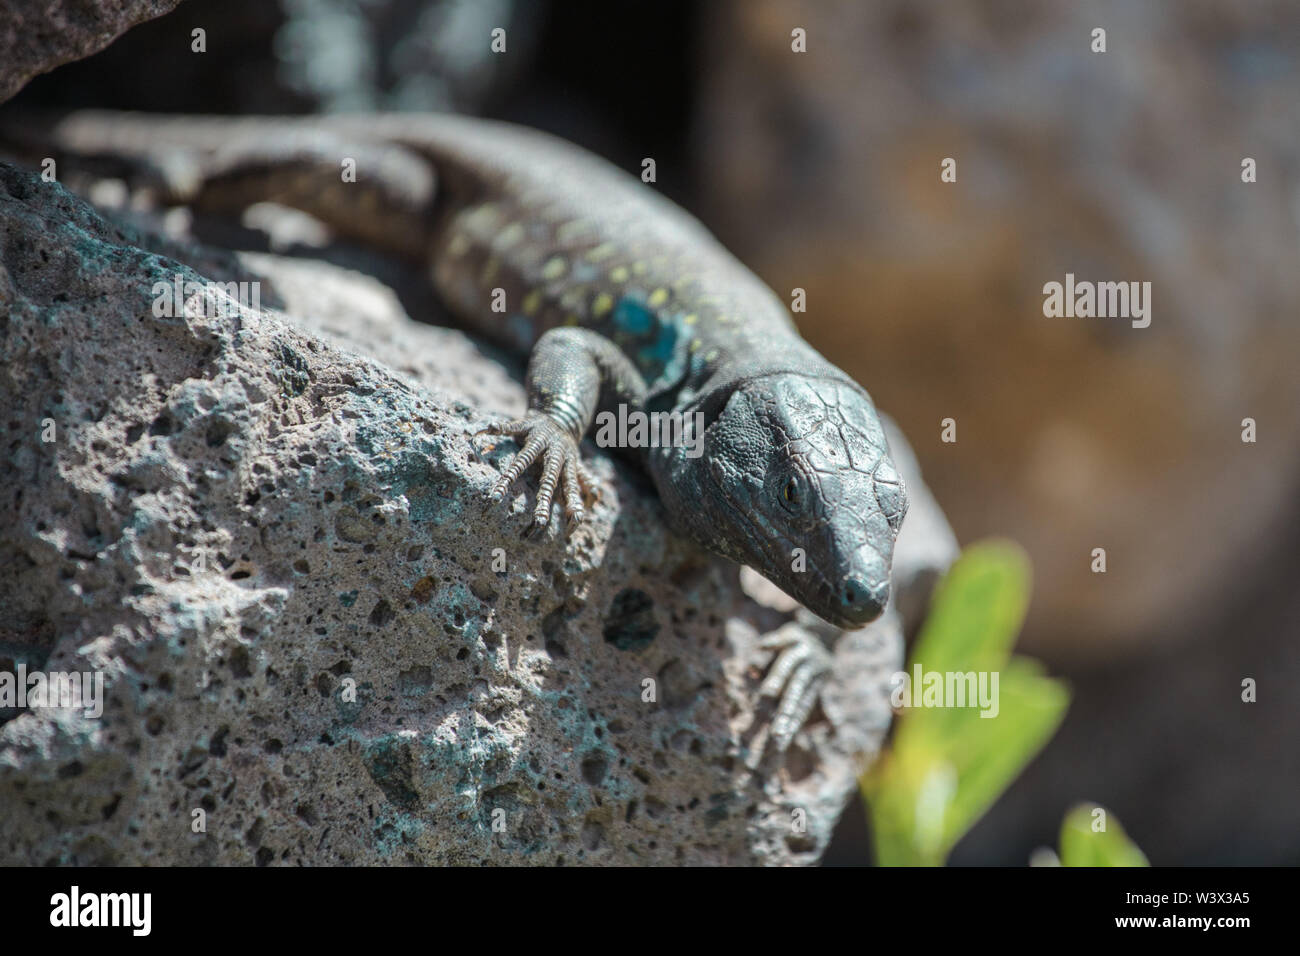 Lizard close up. Wild nature and animal background. Wildlife, reptile Stock Photo